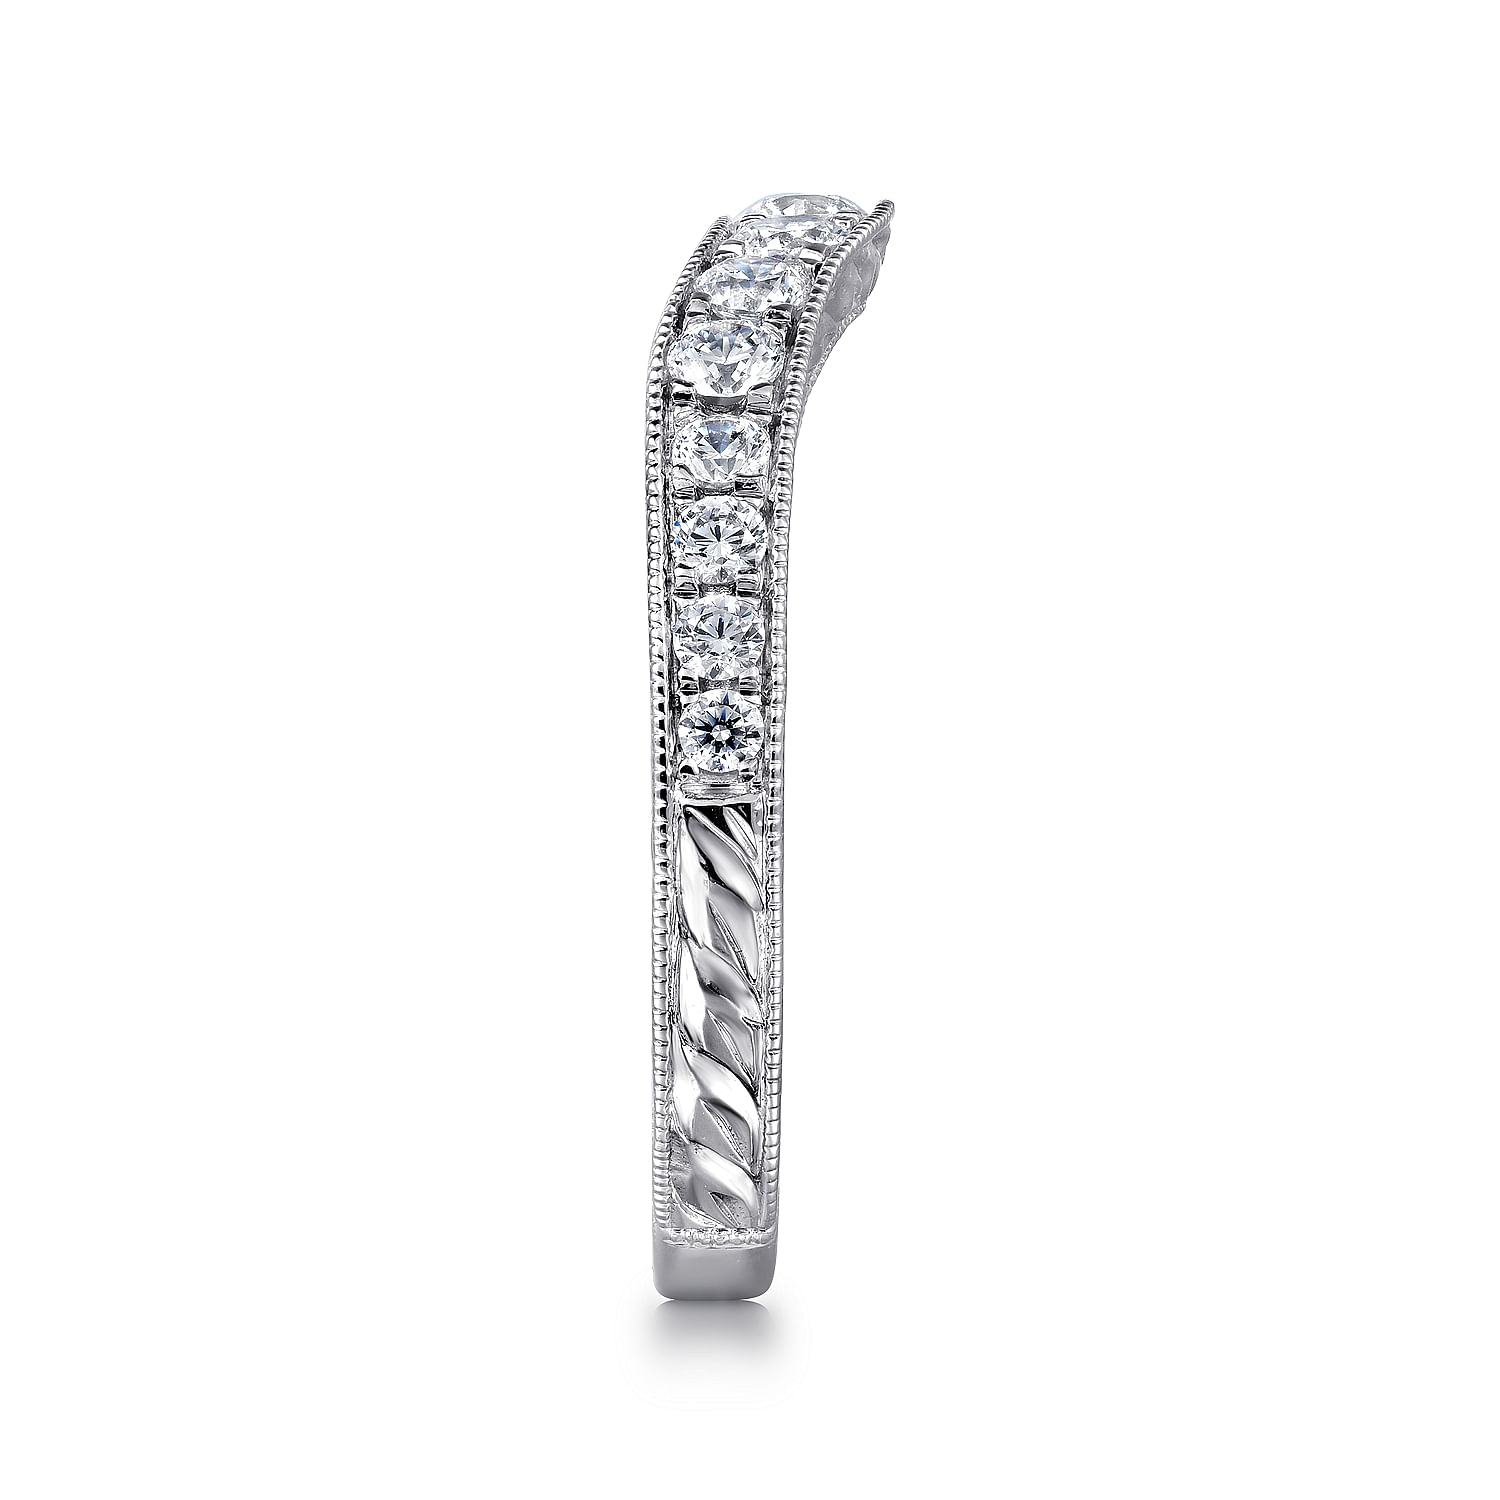 Vintage Inspired 14K White Gold Curved Channel Set Diamond Wedding Band with Engraving